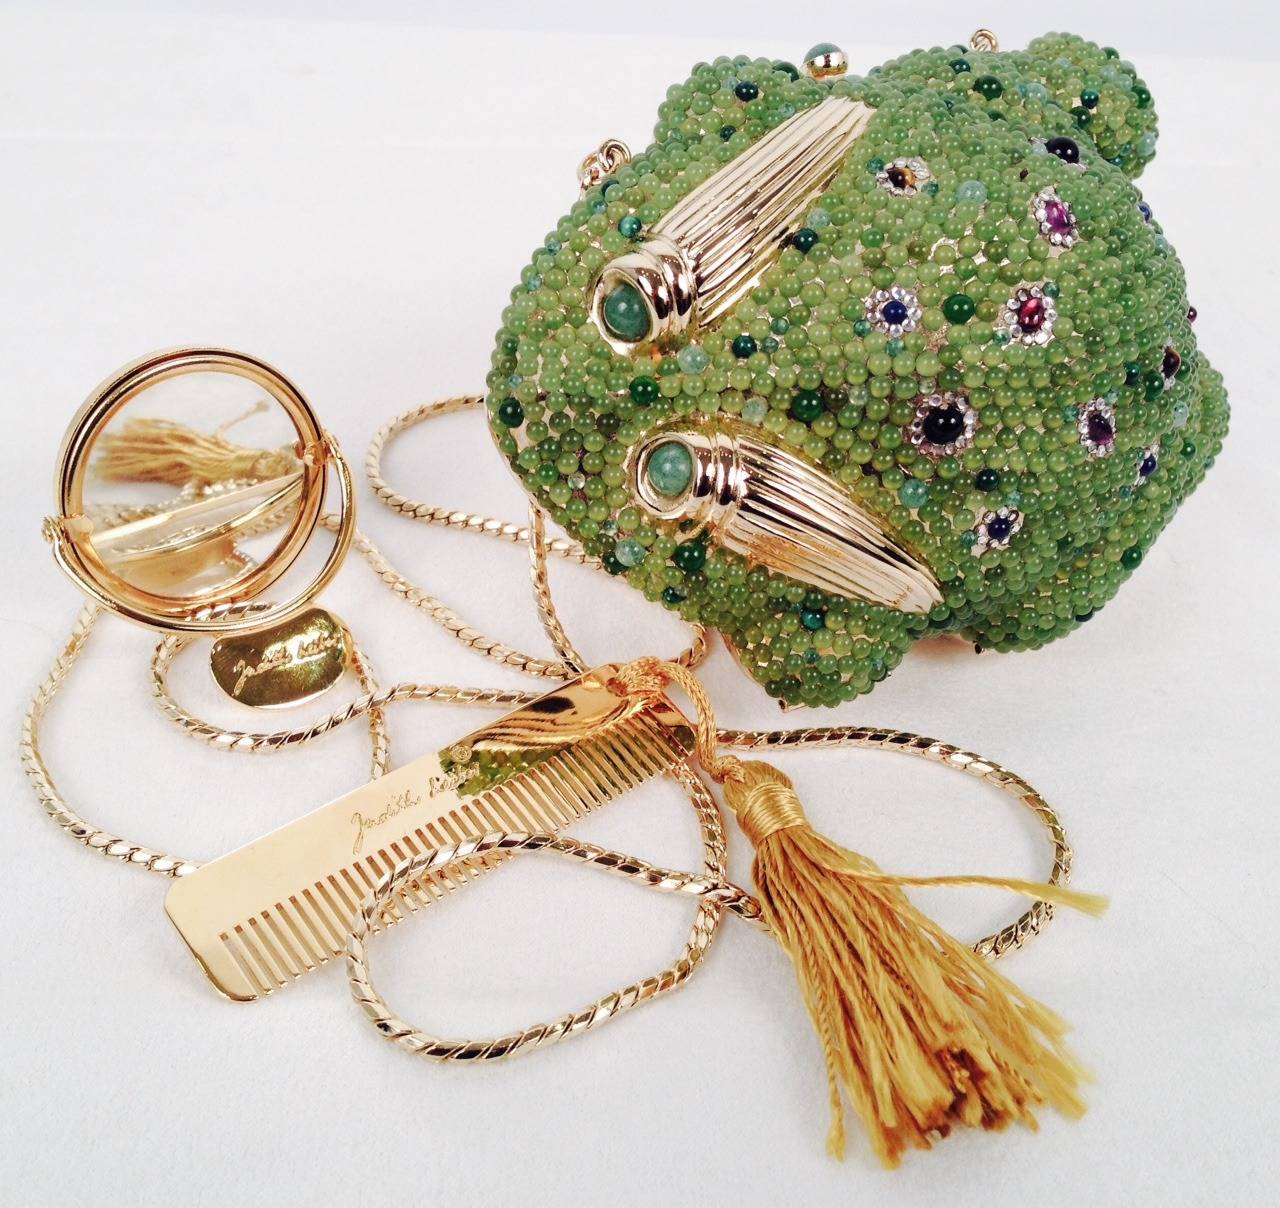 Vintage Judith Leiber Frog Convertible Clutch Minaudiere For Sale 2